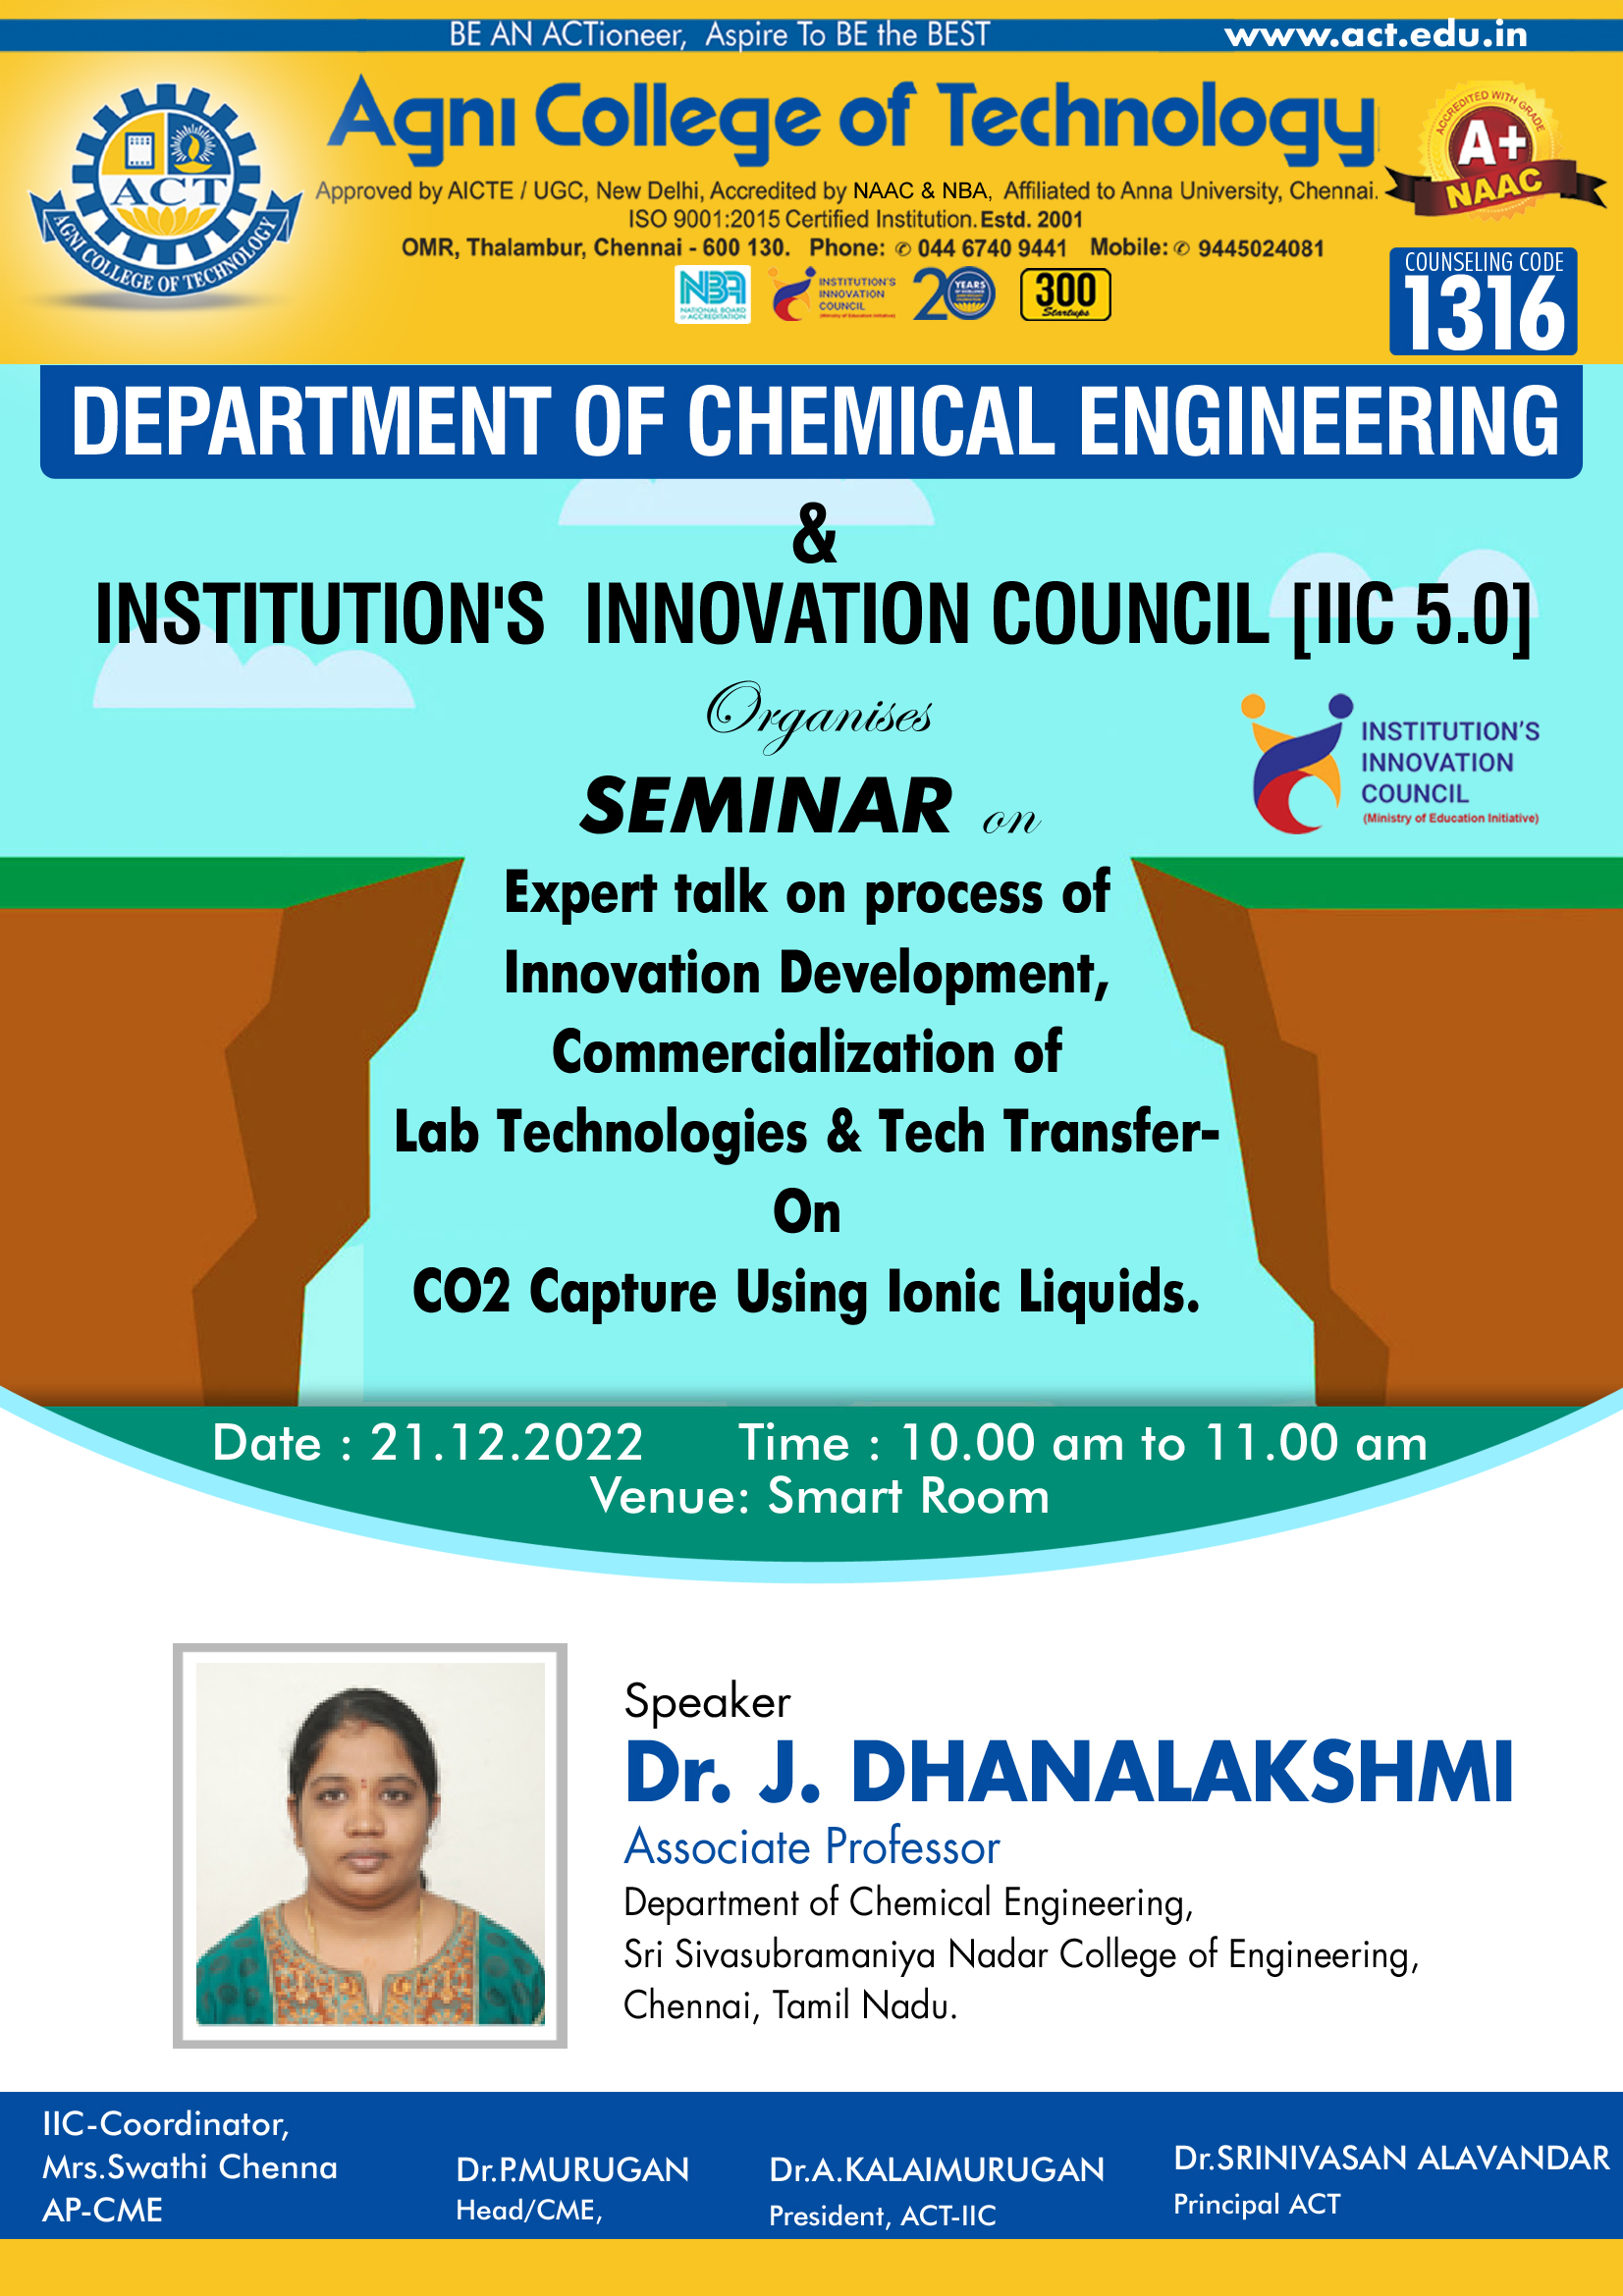 Expert talk on process of Innovation Development, Commercialization of Lab Technologies & Tech Transfer on CO2 Capture using Ionic Liquids